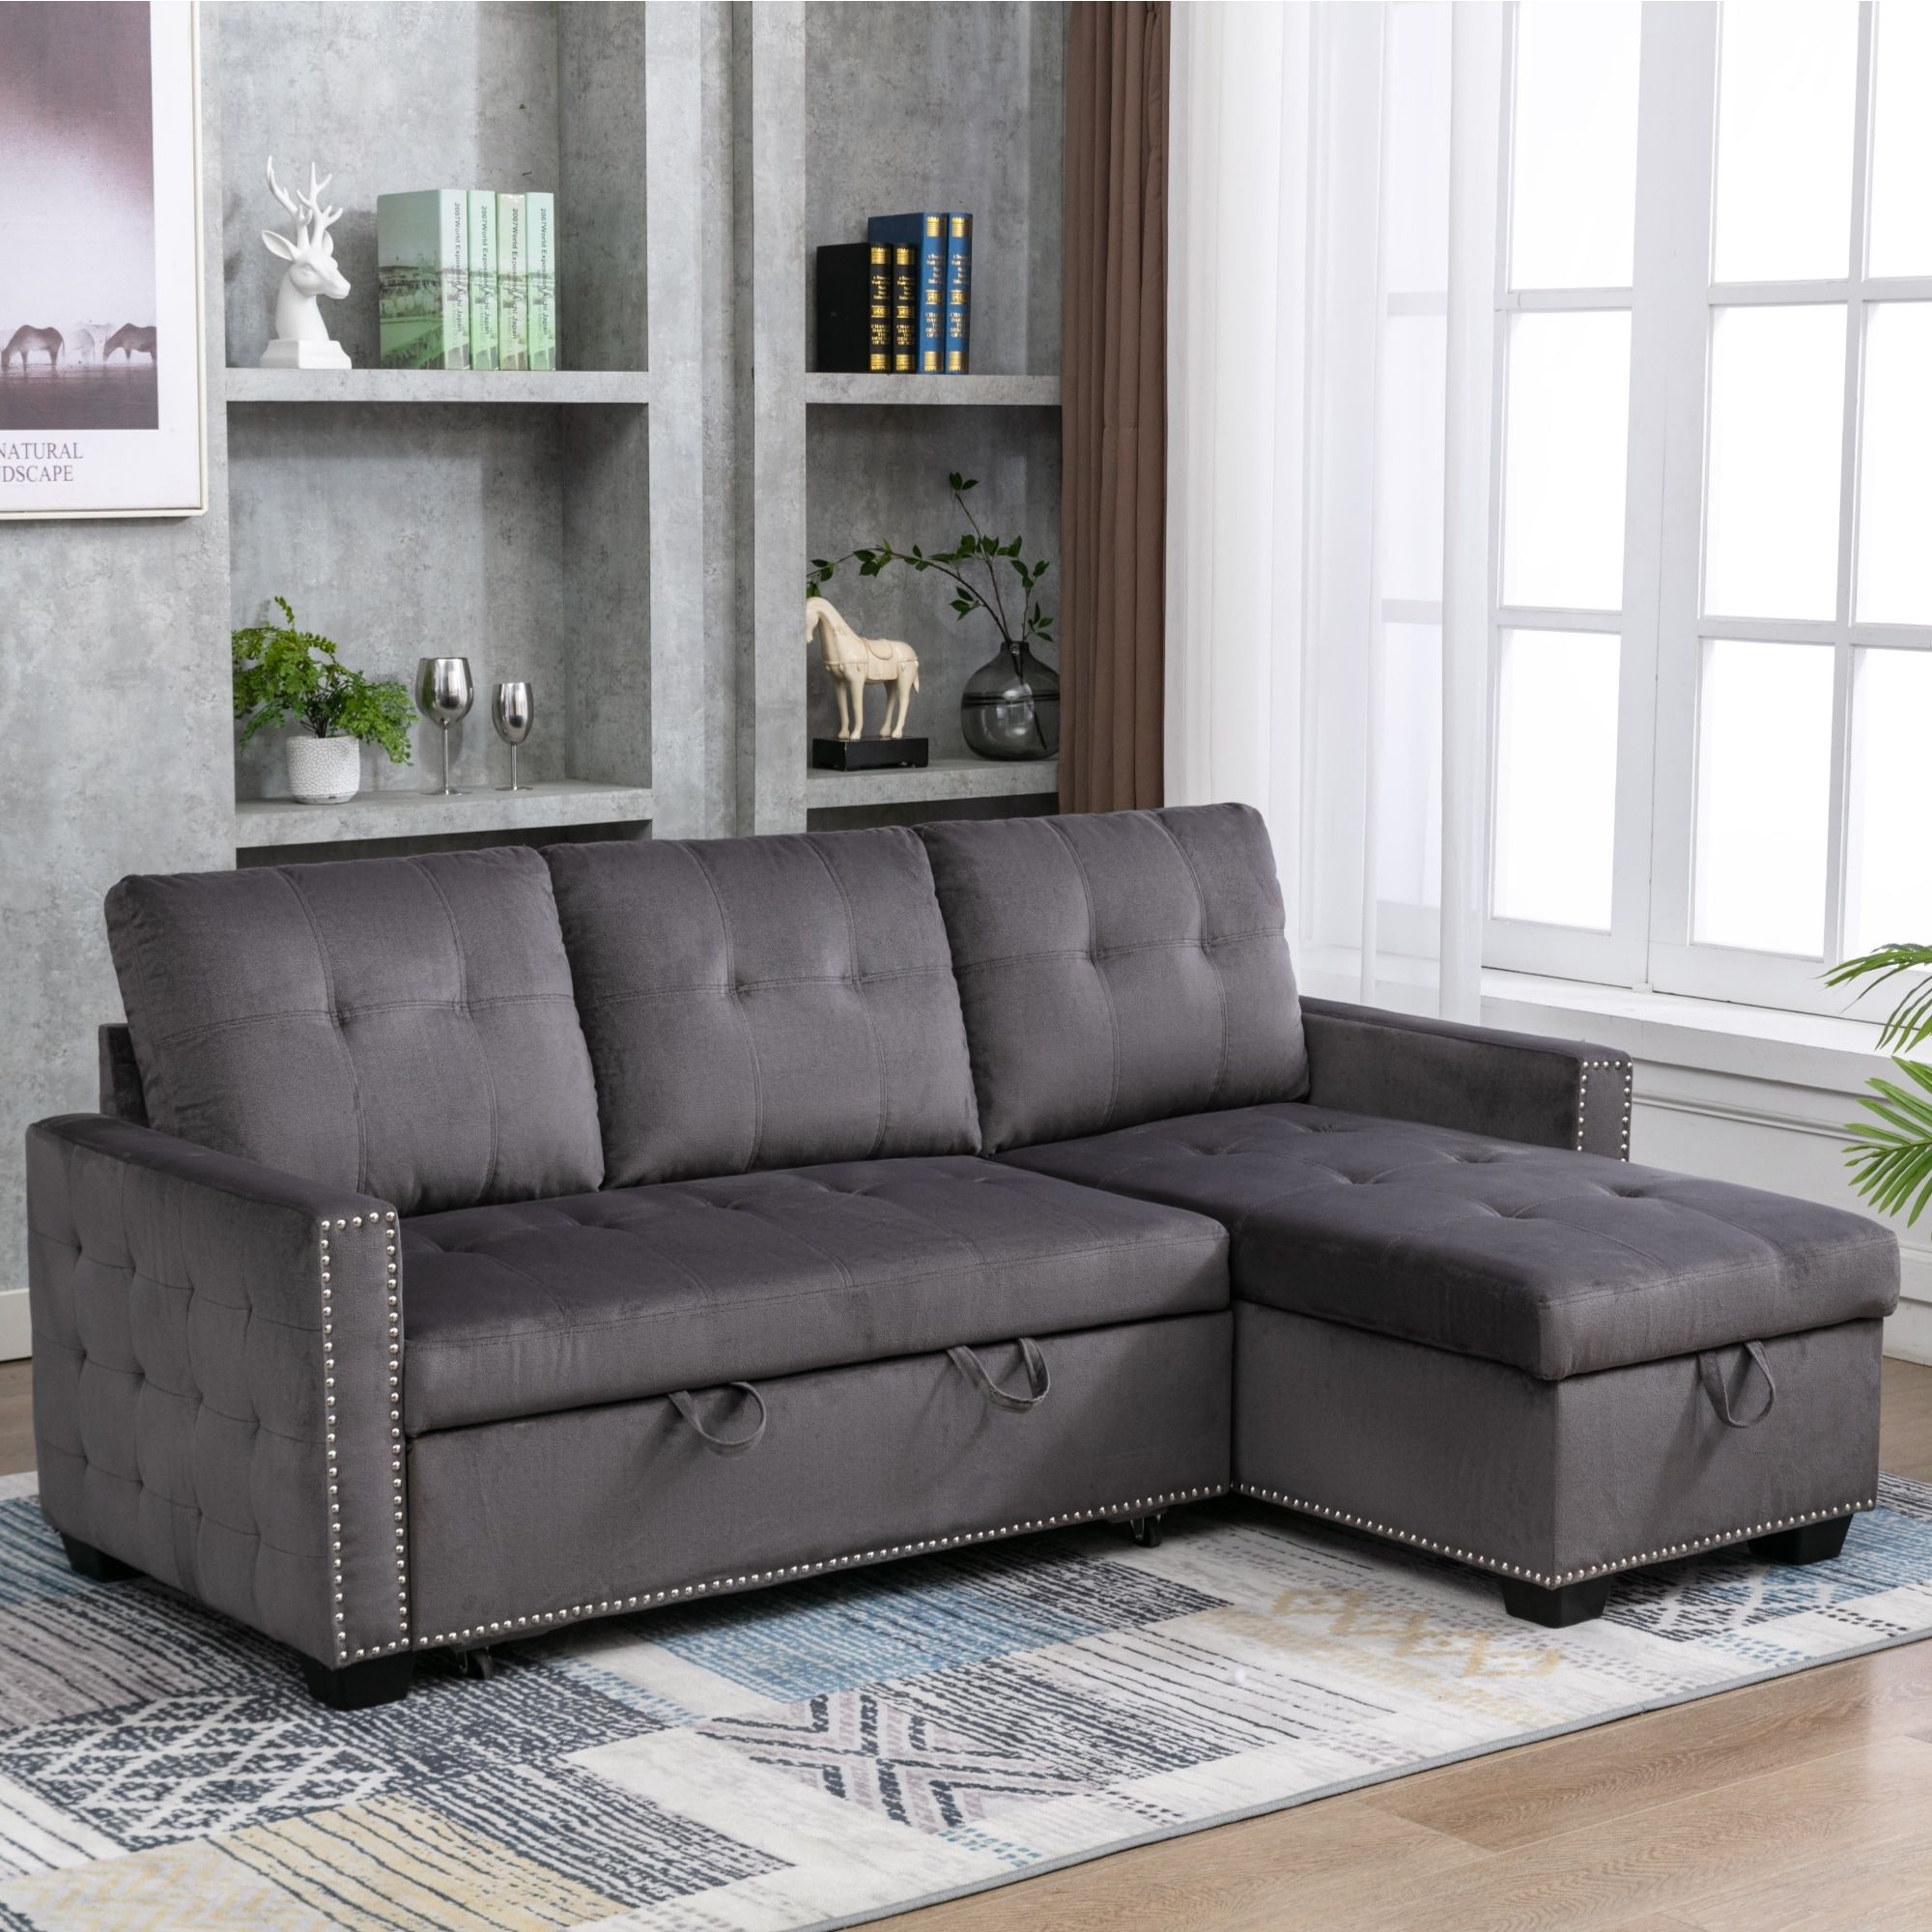 Reversible Velvet Sectional Sofa Pull Out Sleeper Sofa Bed L Shape 3 Seat  Sectional Storage Chaise With Removable Cushions – On Sale – – 36958384 With Regard To Chaise 3 Seat L Shaped Sleeper Sofas (View 4 of 20)